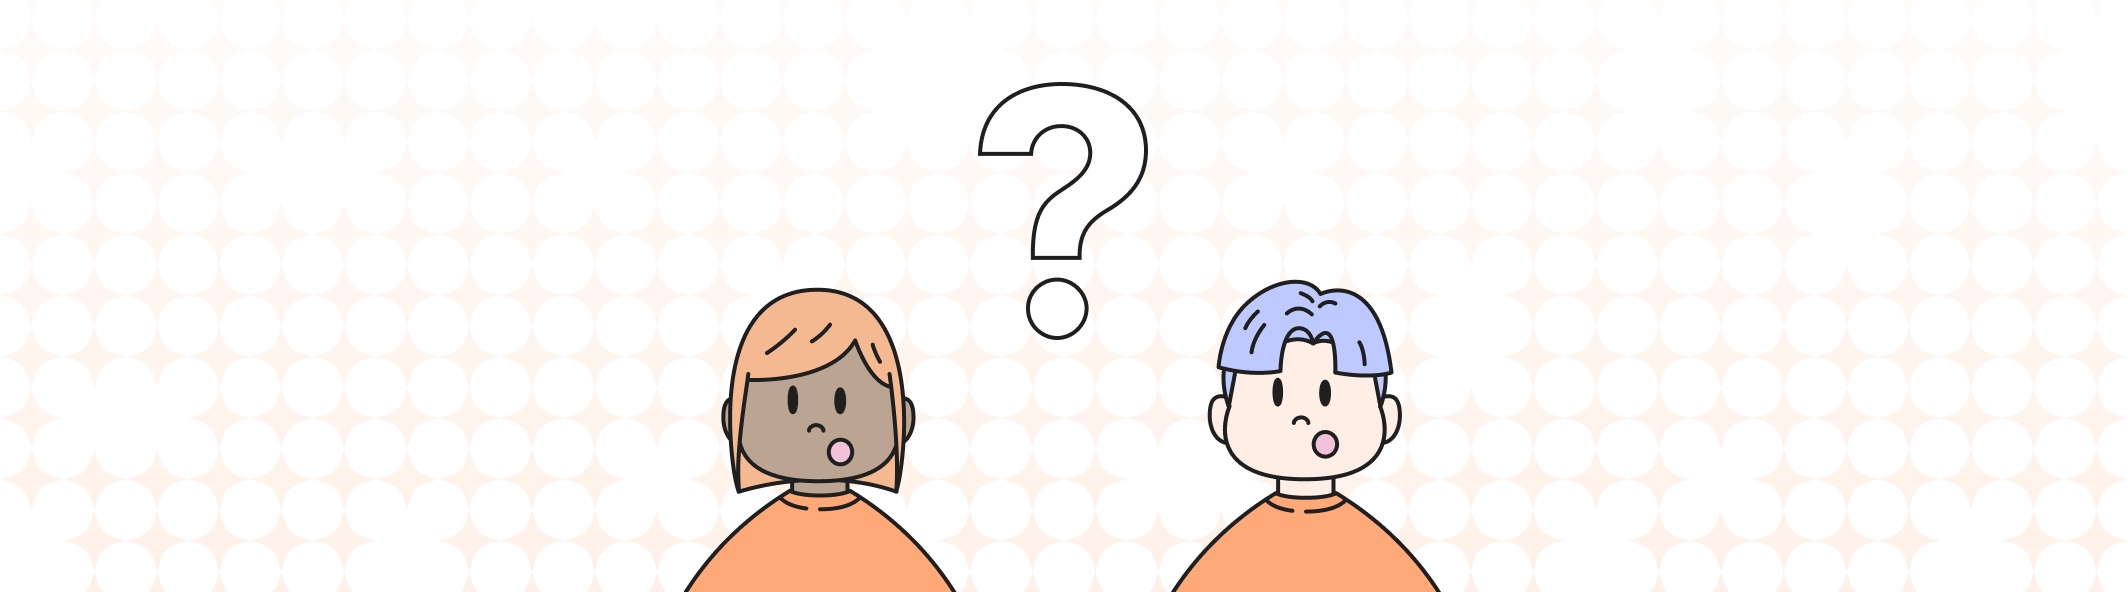 A line illustration of two people with their mouth open, and a giant question mark between them.